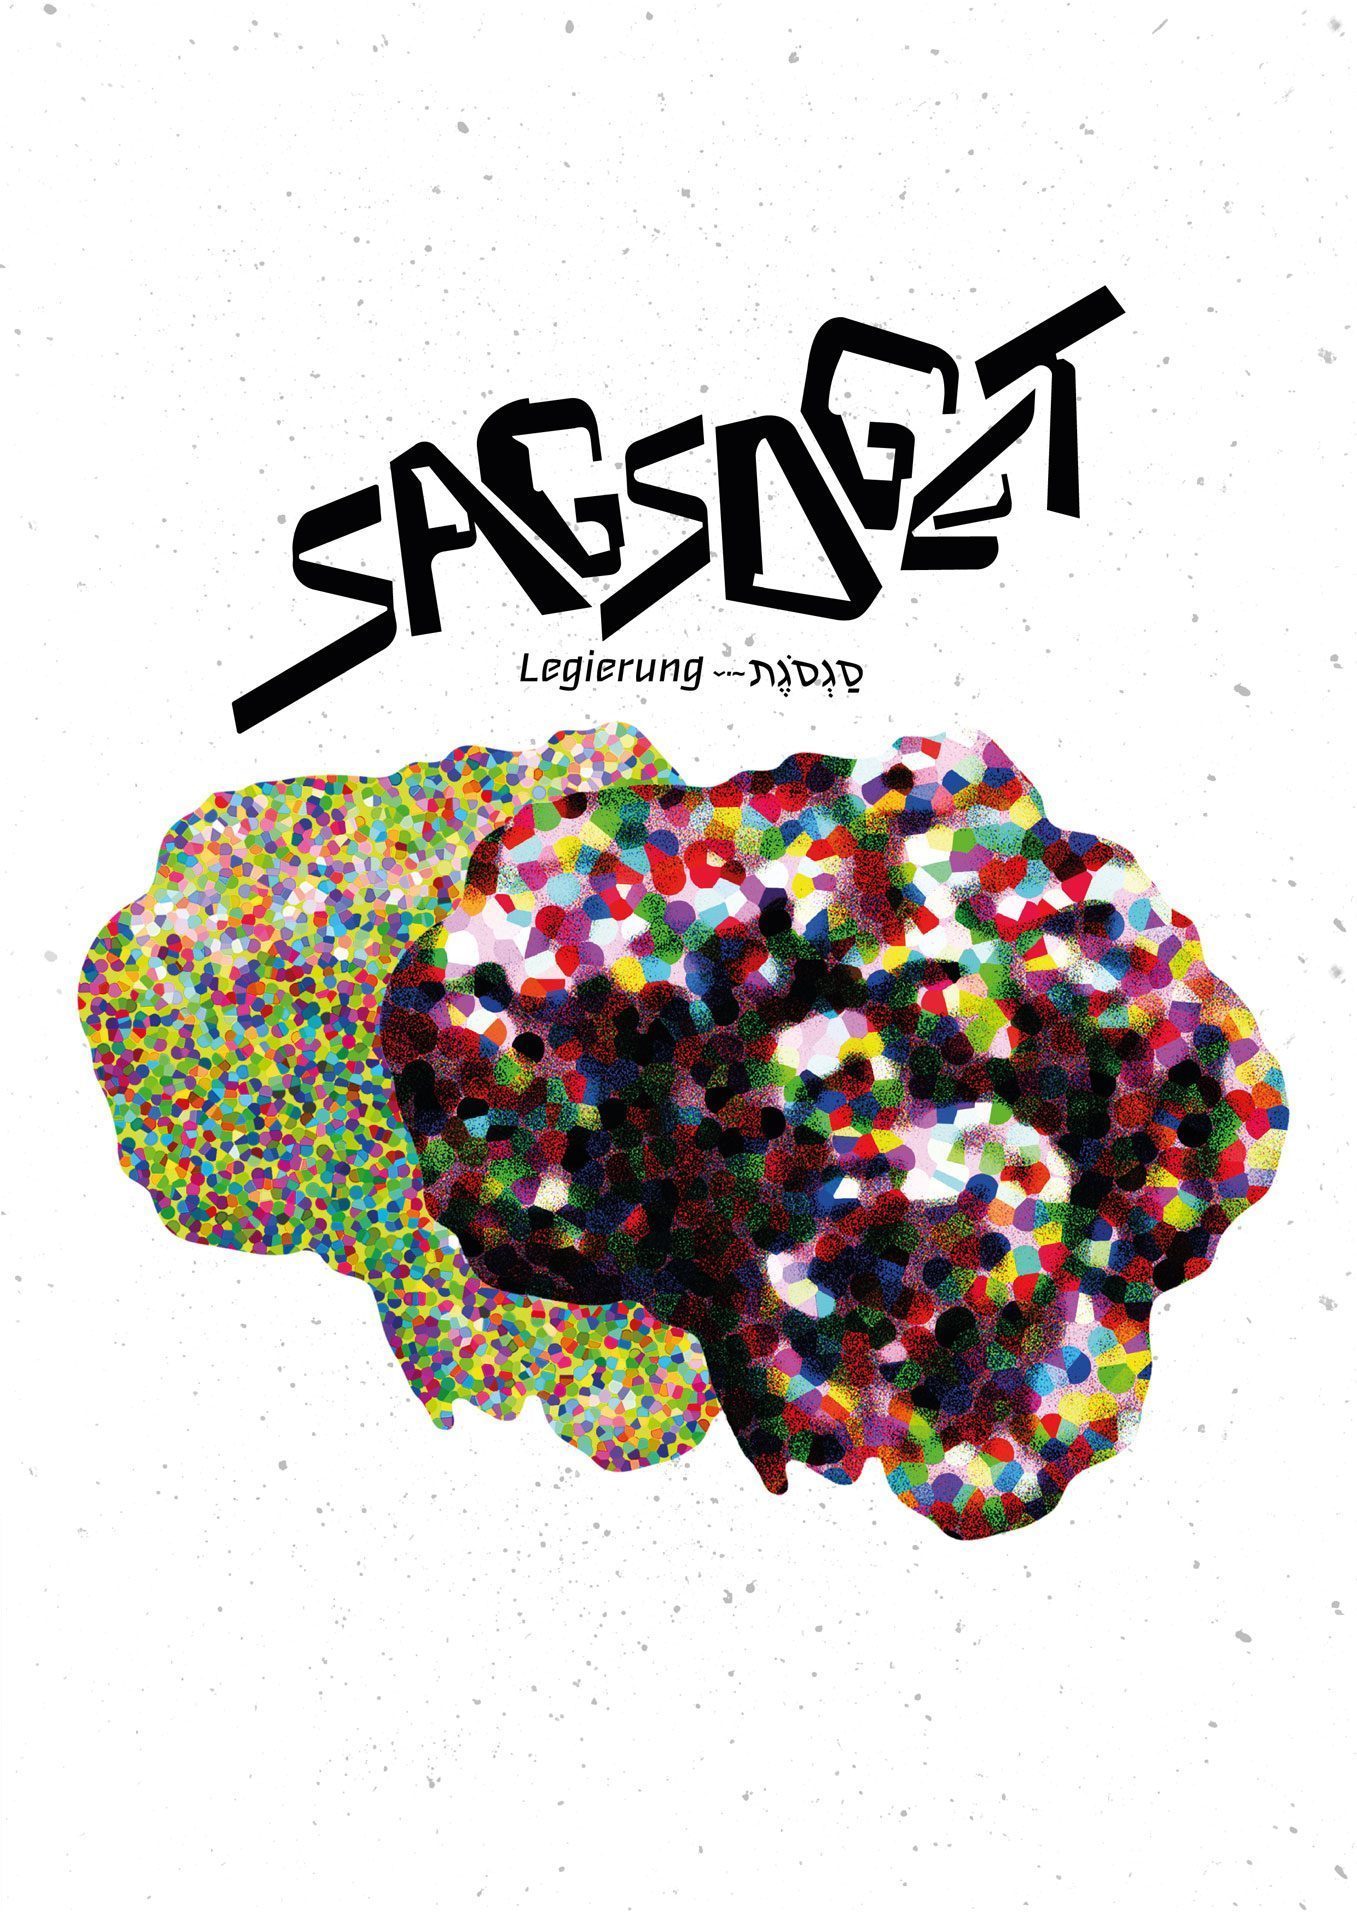 Graphic to promote the exhibition. Two large lumps of colourful pixels one behind the other. Sagsoset is written above them in black letters.